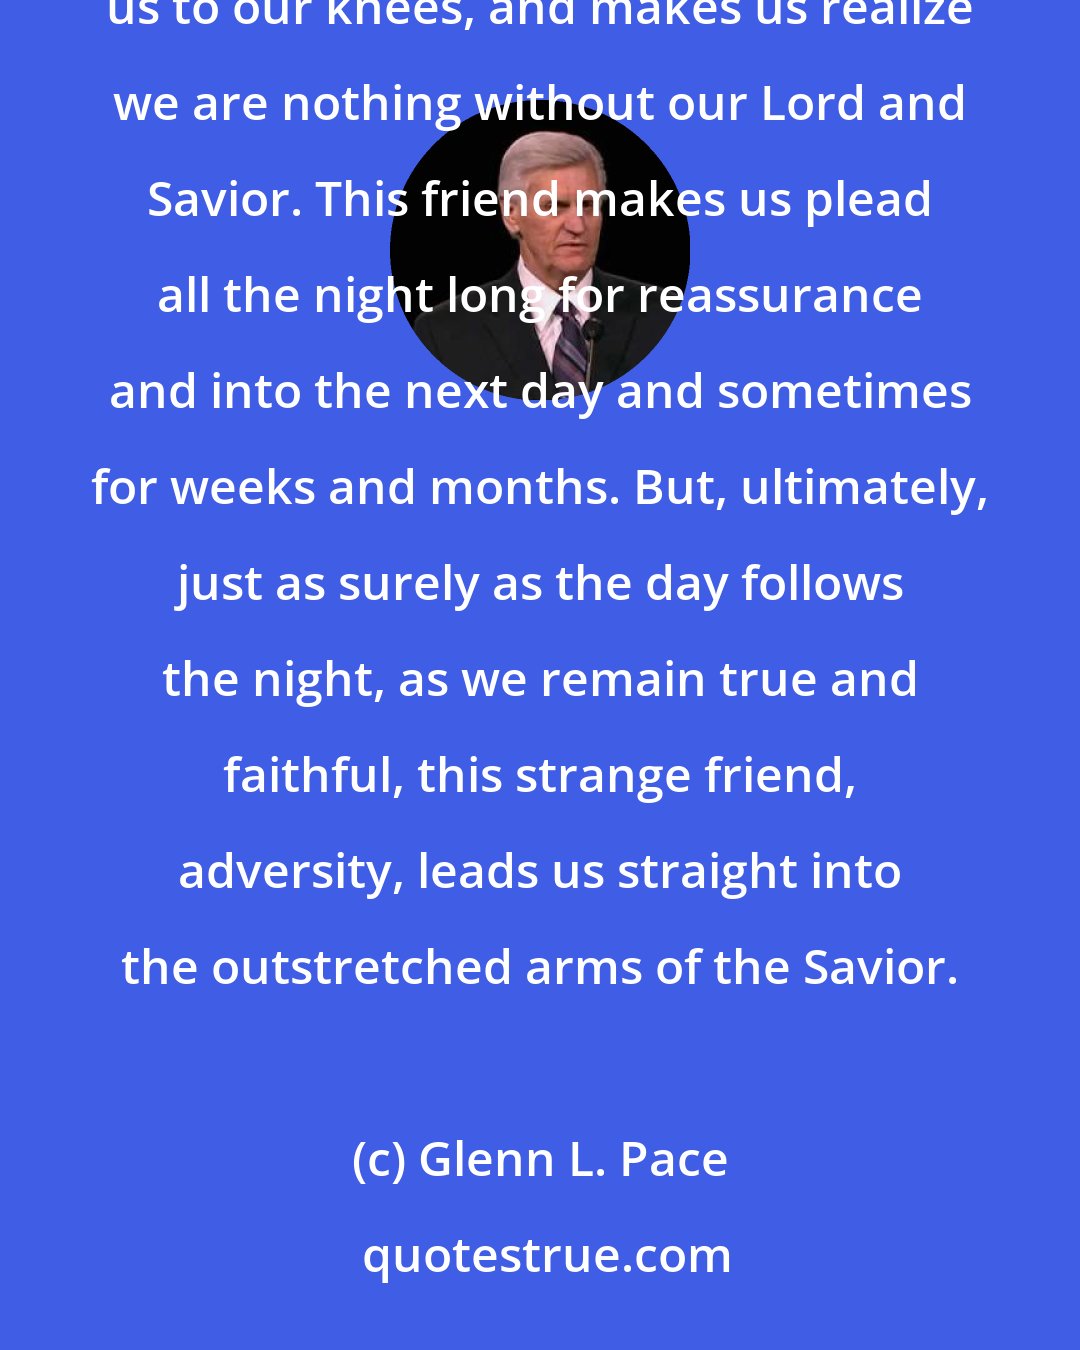 Glenn L. Pace: Into each of our lives come golden moments of adversity. This painful friend breaks our hearts, drops us to our knees, and makes us realize we are nothing without our Lord and Savior. This friend makes us plead all the night long for reassurance and into the next day and sometimes for weeks and months. But, ultimately, just as surely as the day follows the night, as we remain true and faithful, this strange friend, adversity, leads us straight into the outstretched arms of the Savior.